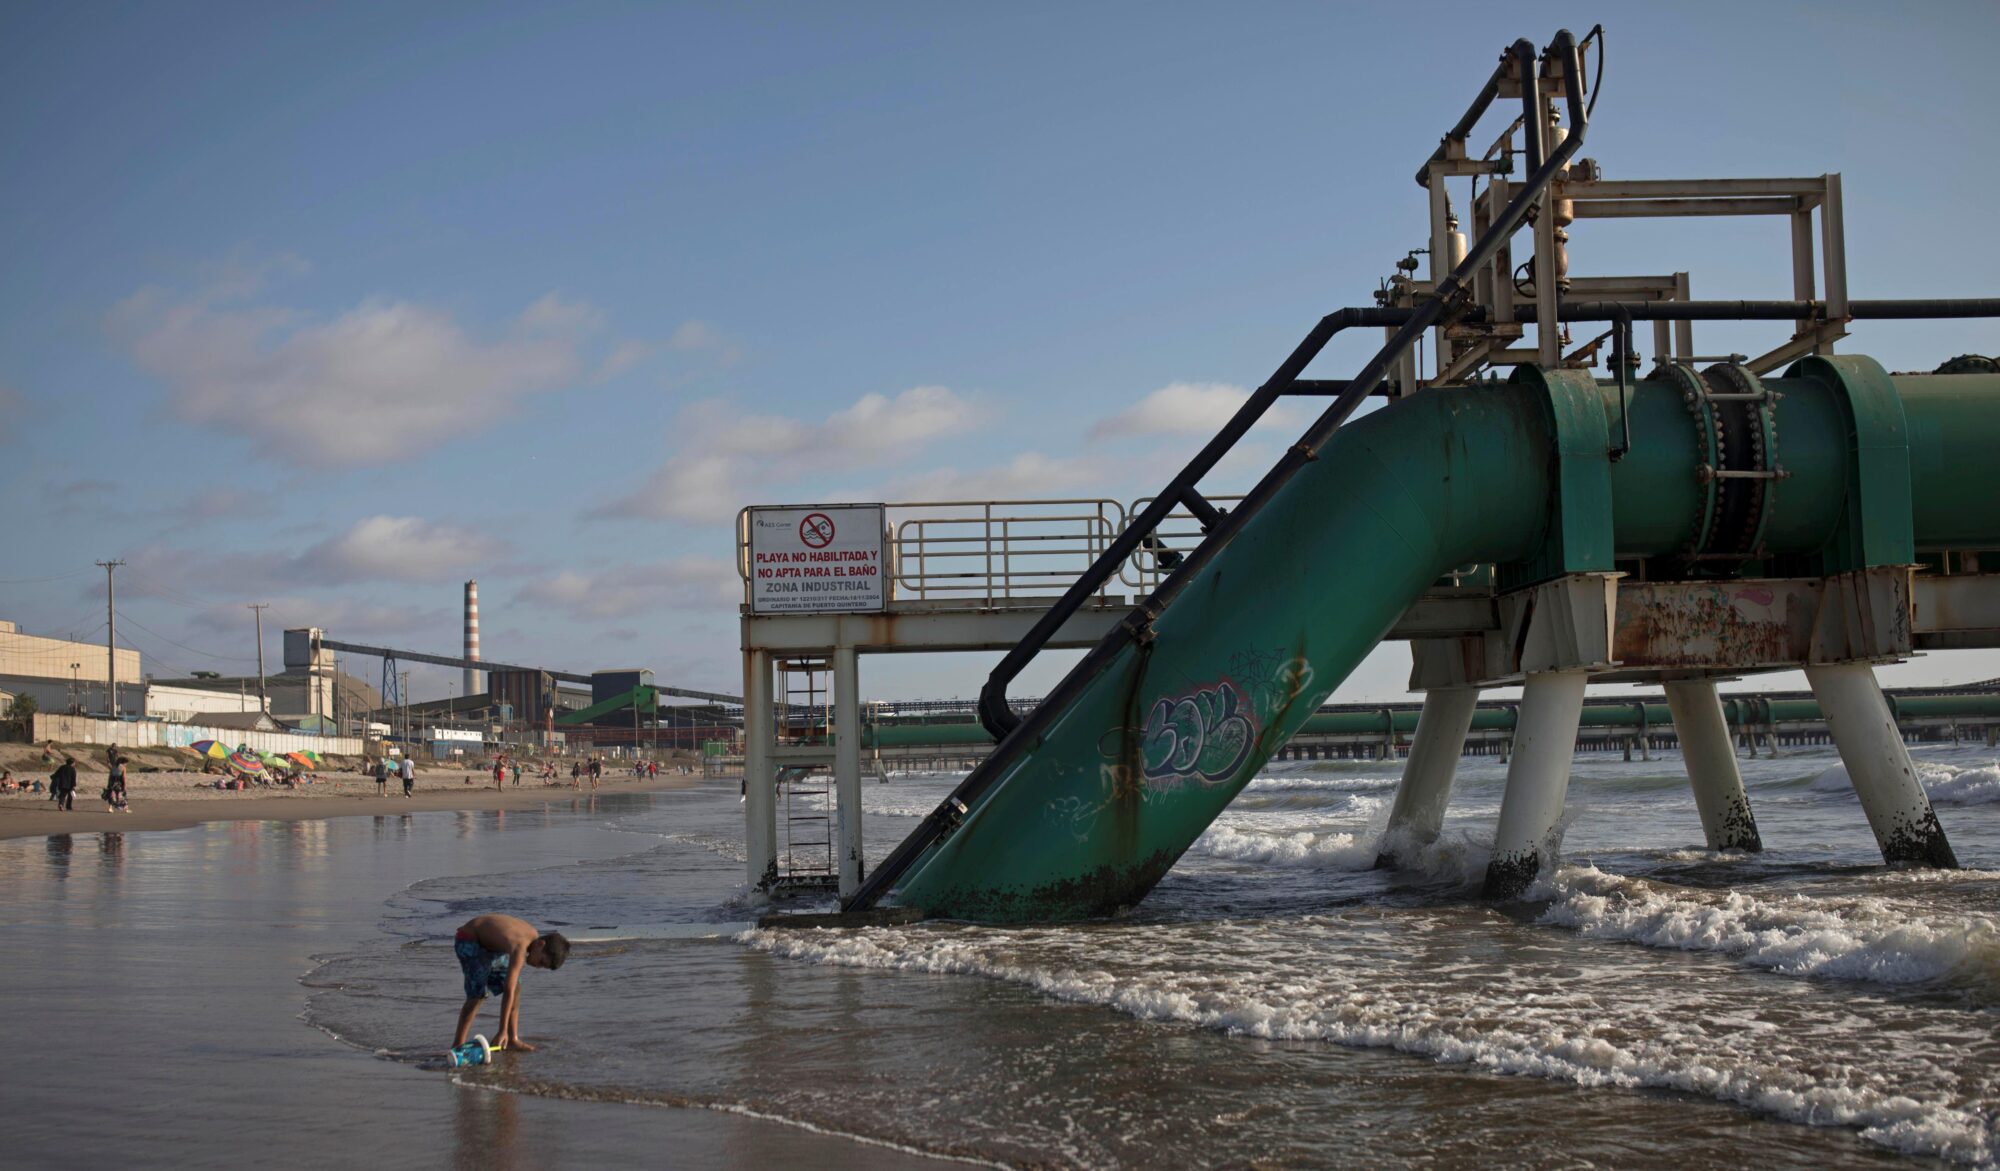 A child plays on the beach in front of a thermoelectric plant pipeline at Las Ventanas in Valparaiso, Chile